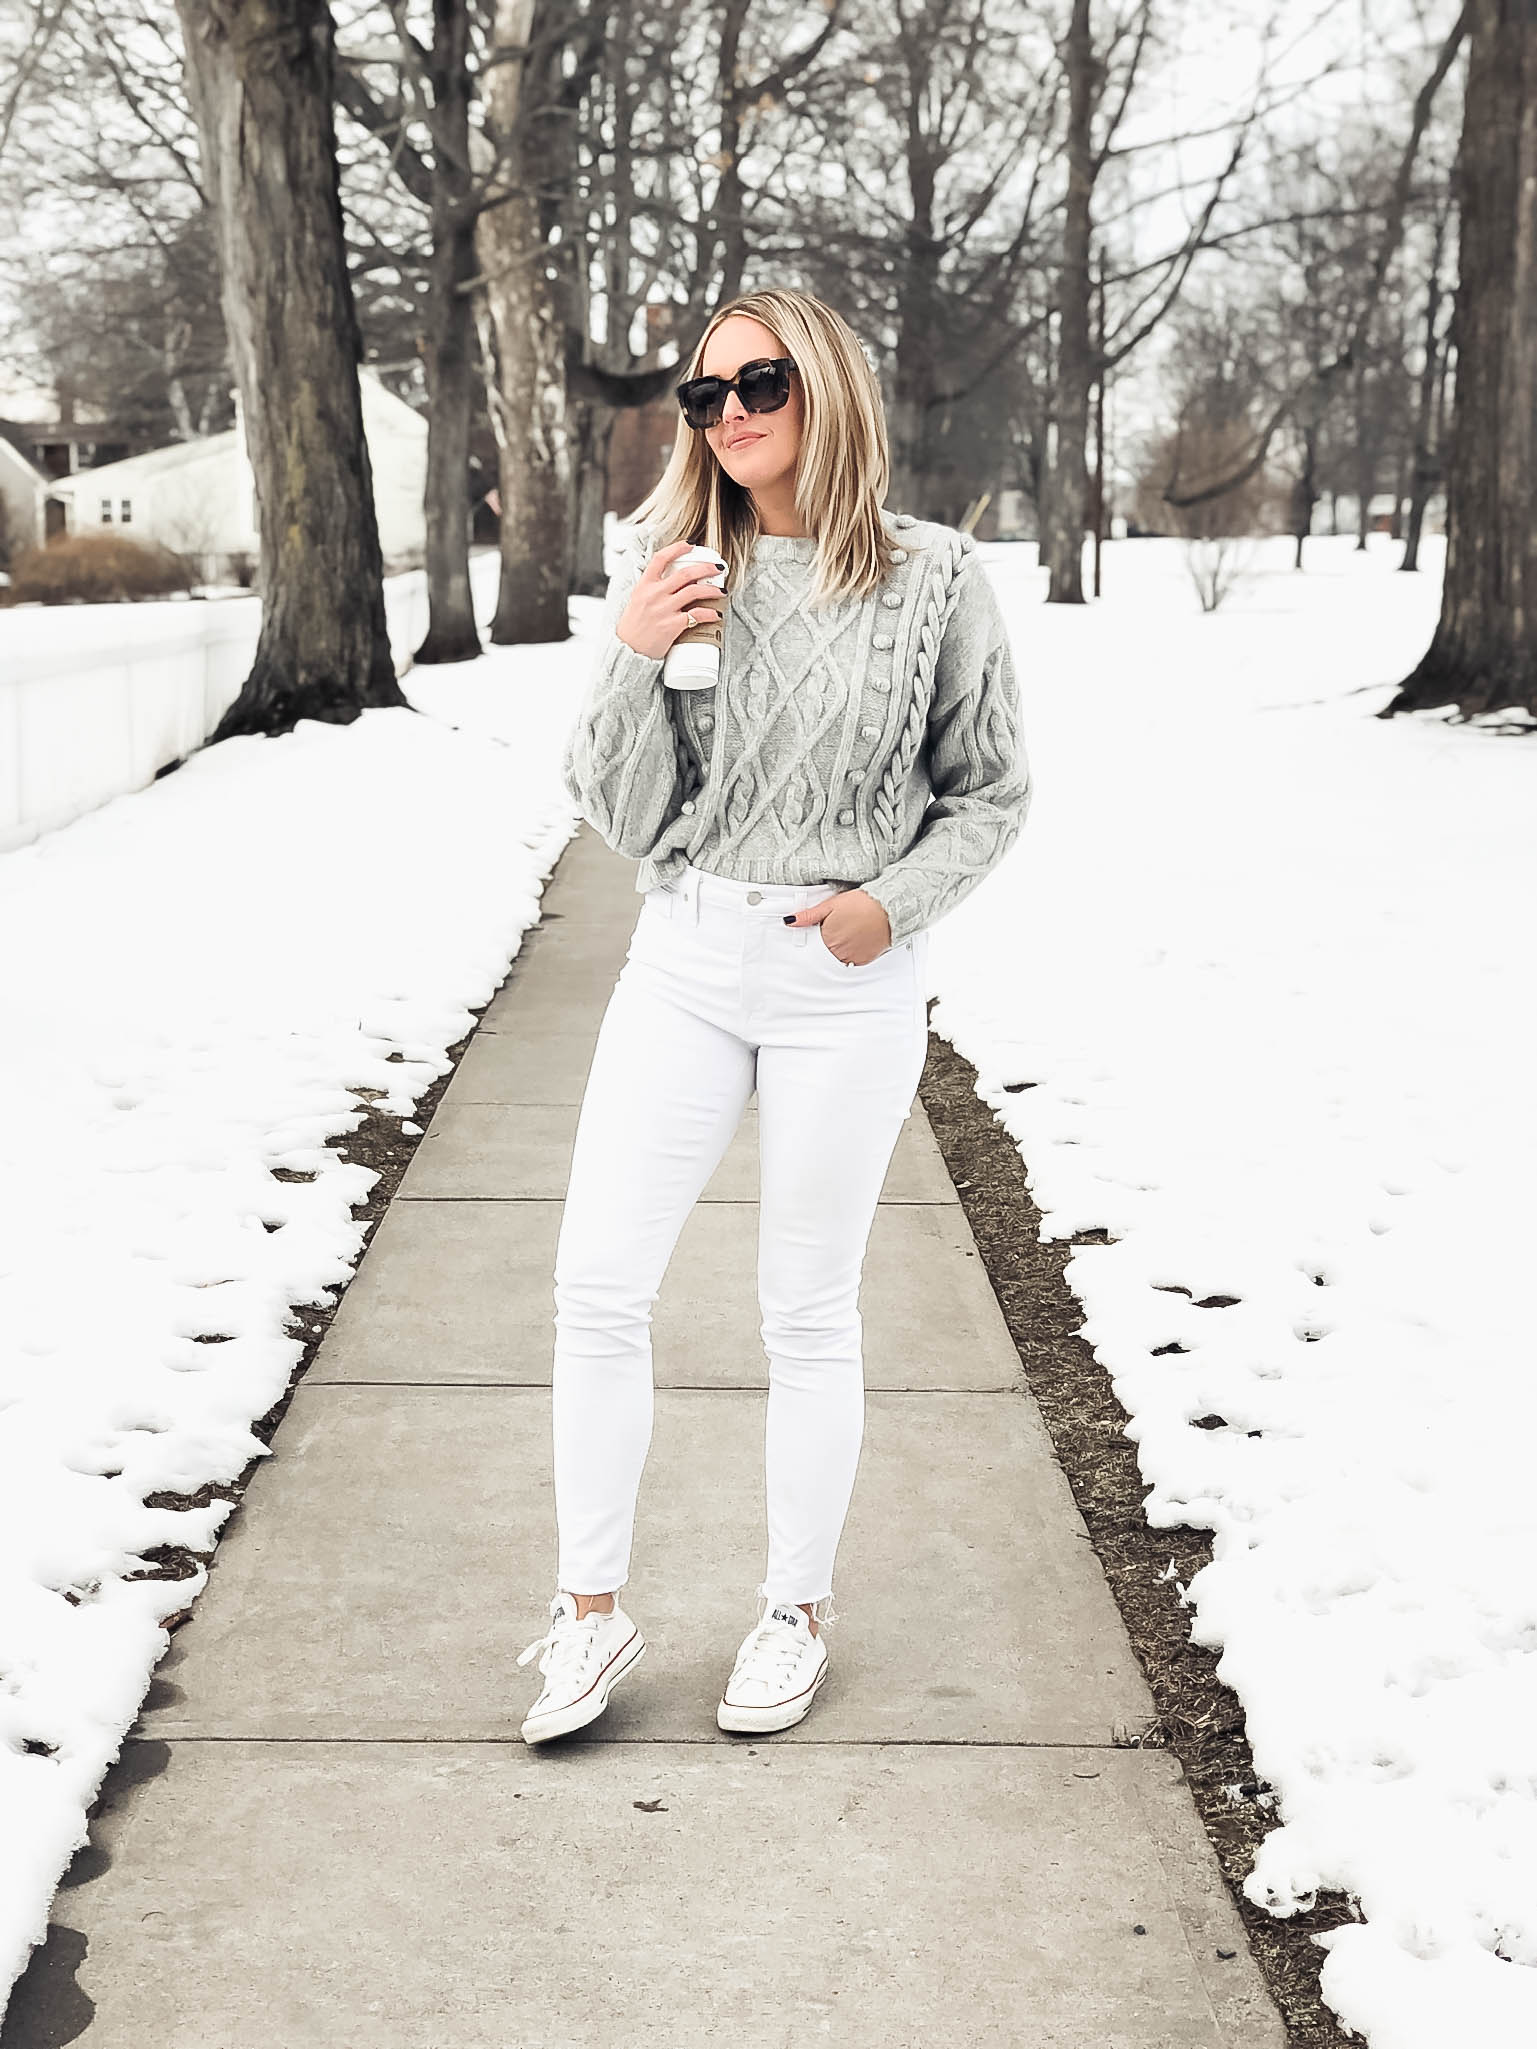 How To Wear White Jeans In Winter - Red White & Denim